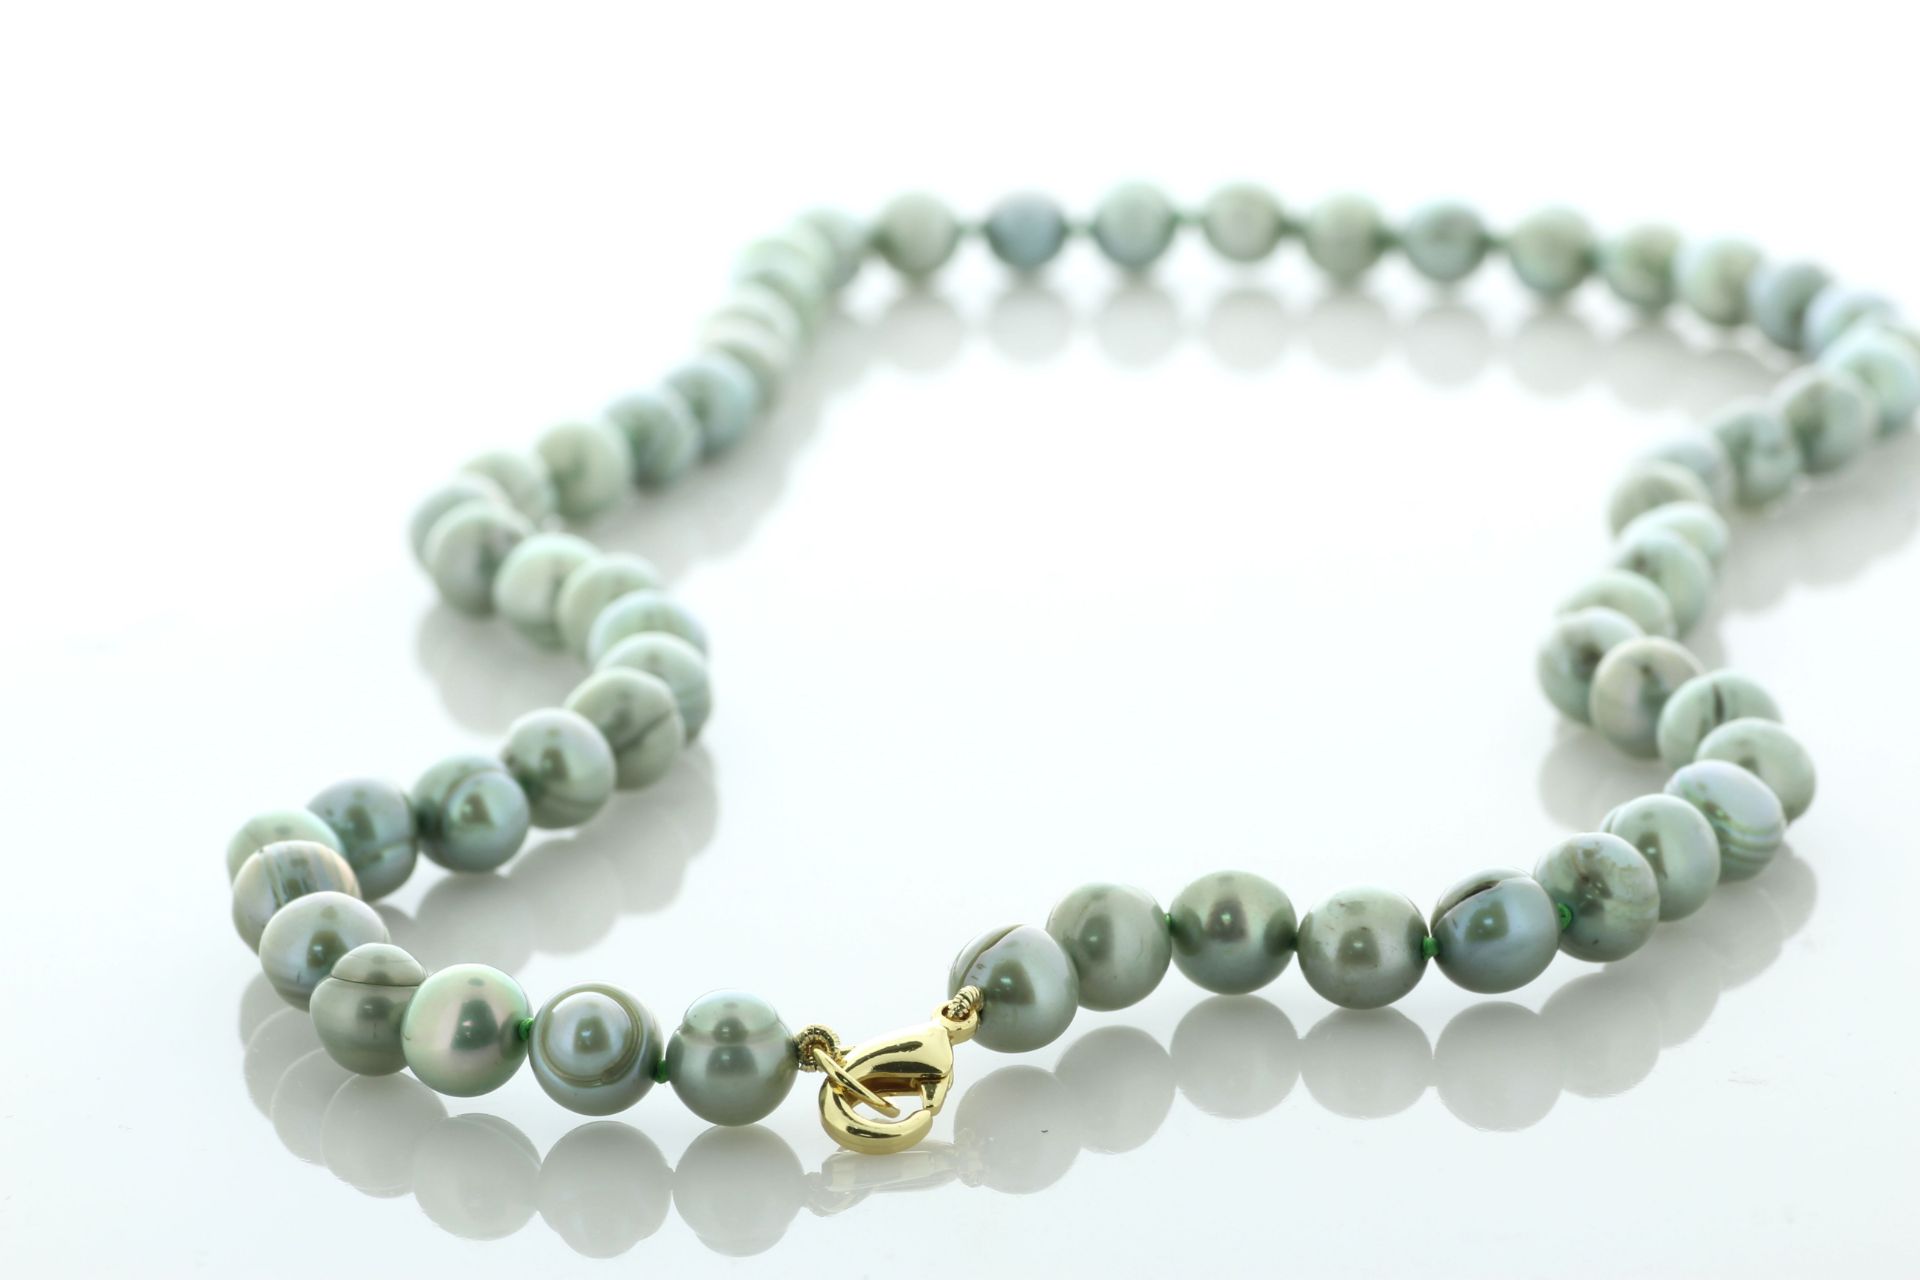 18 Inch Freshwater Cultured 7.0 - 7.5mm Pearl Necklace With Gold Plated Clasp - Valued By AGI £280. - Image 2 of 5